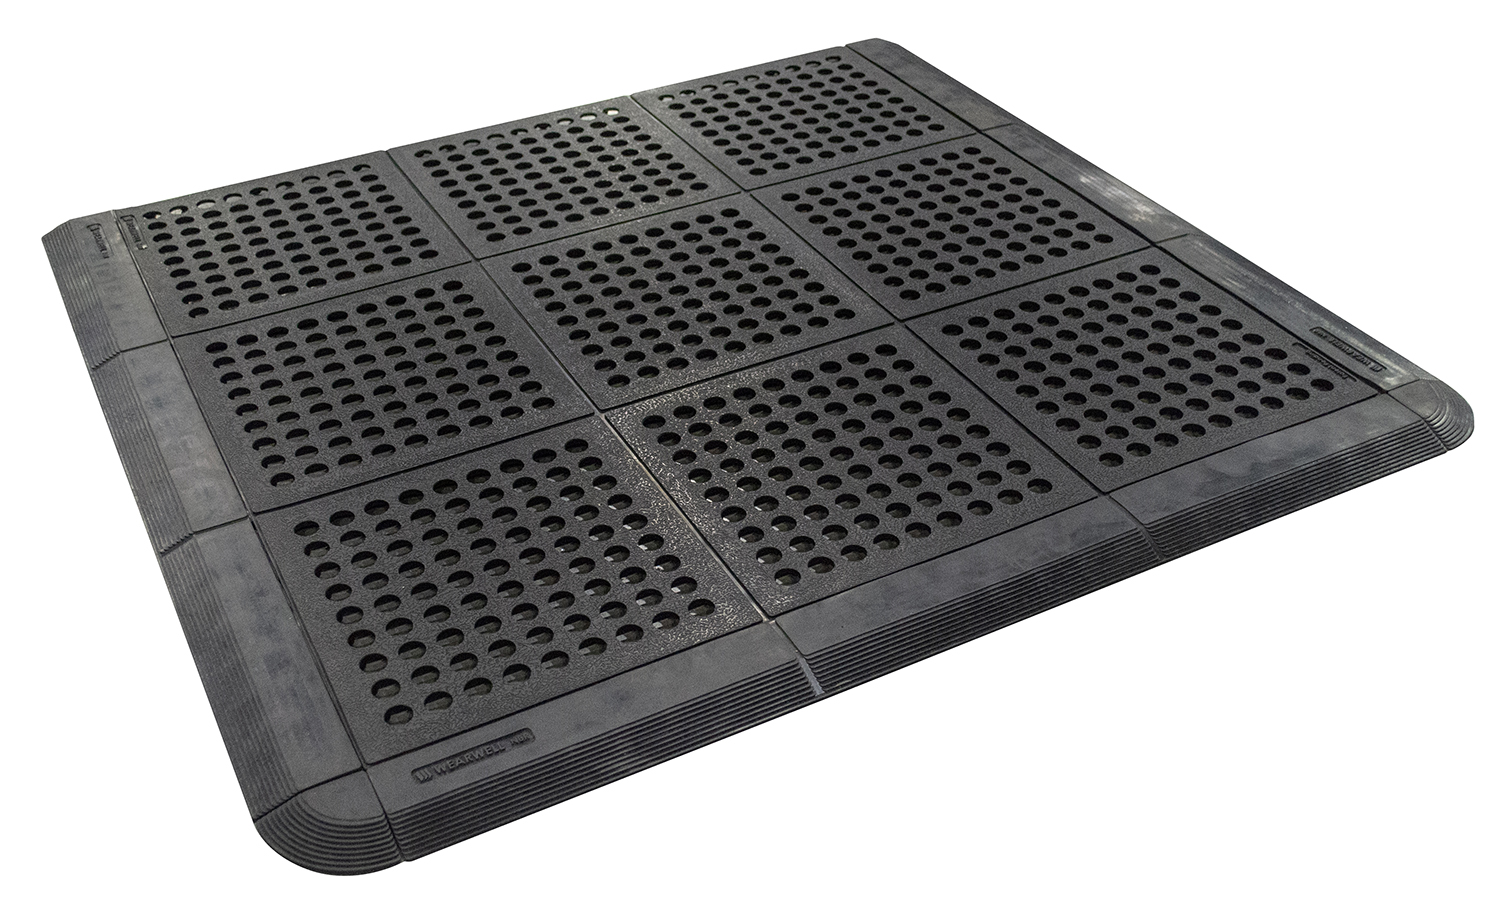 24/SEVEN LockSafe drainage mat allows for fluids and debris to pass through to keep traction in slippery environments.